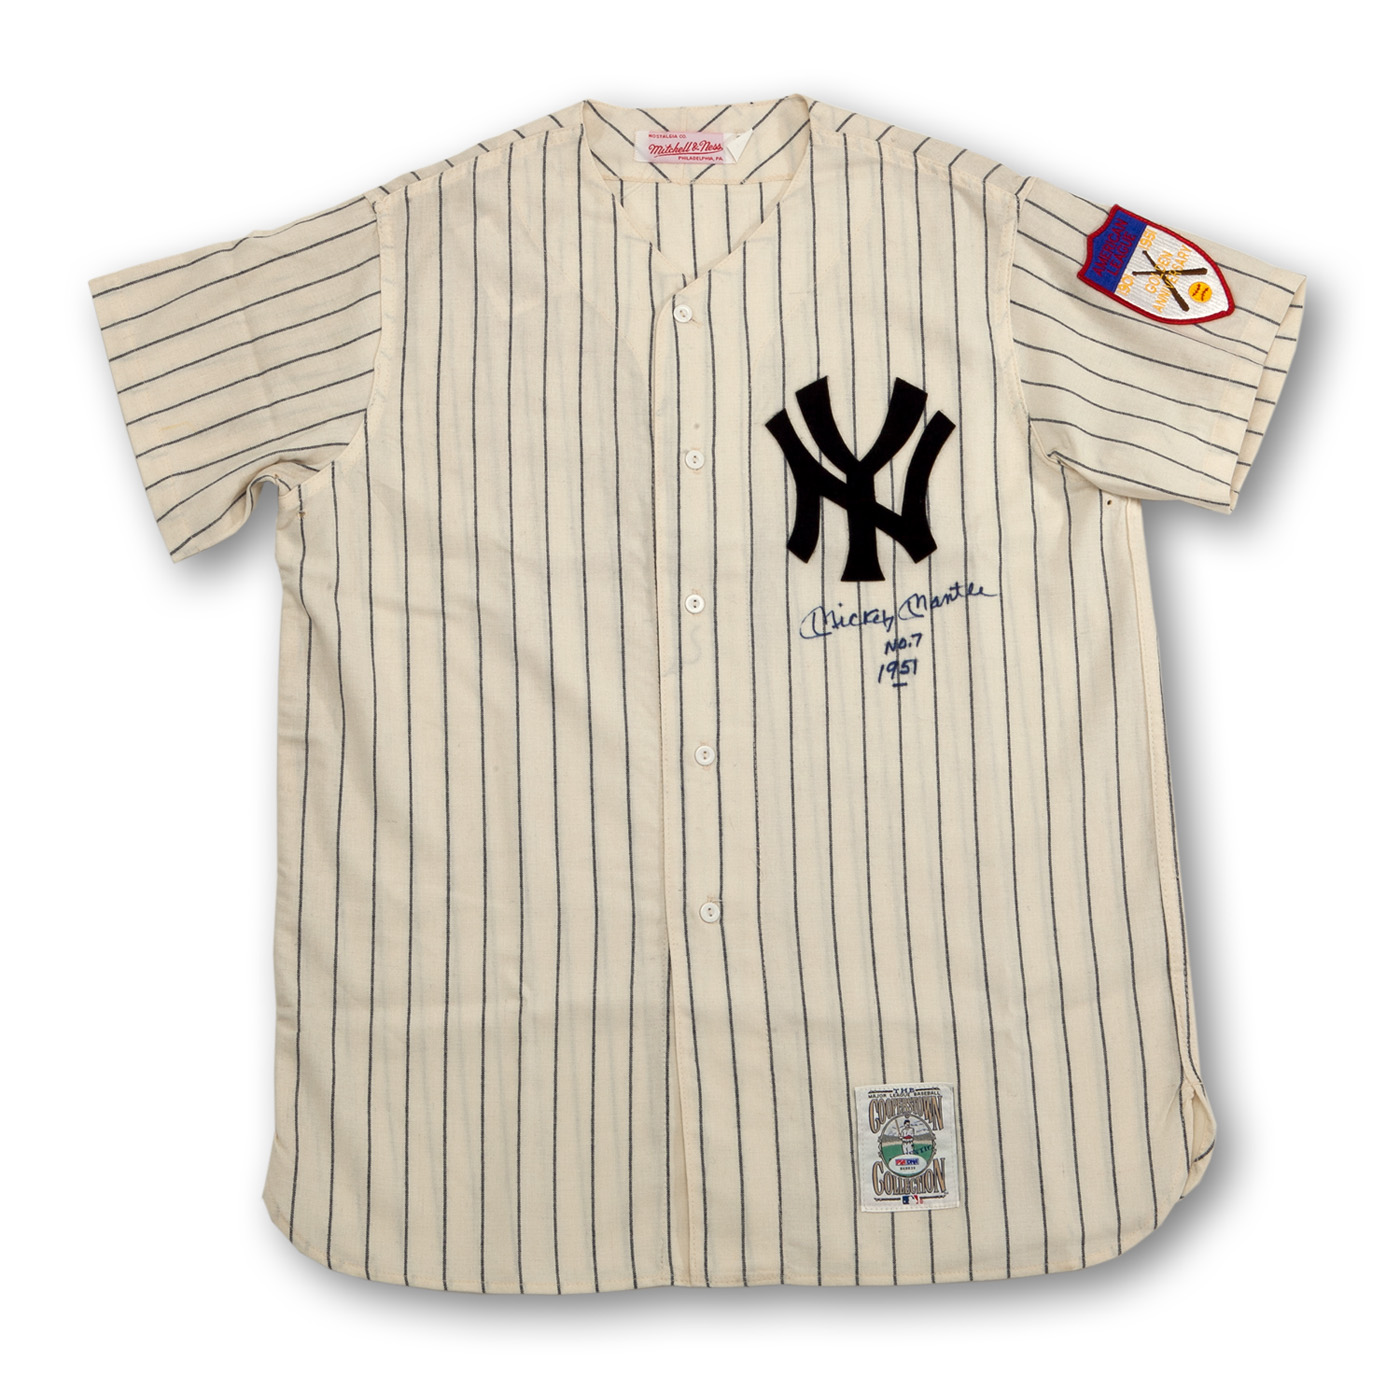 Sold at Auction: LOT OF 2 REPLICA COOPERSTOWN COLLECTION JERSEYS